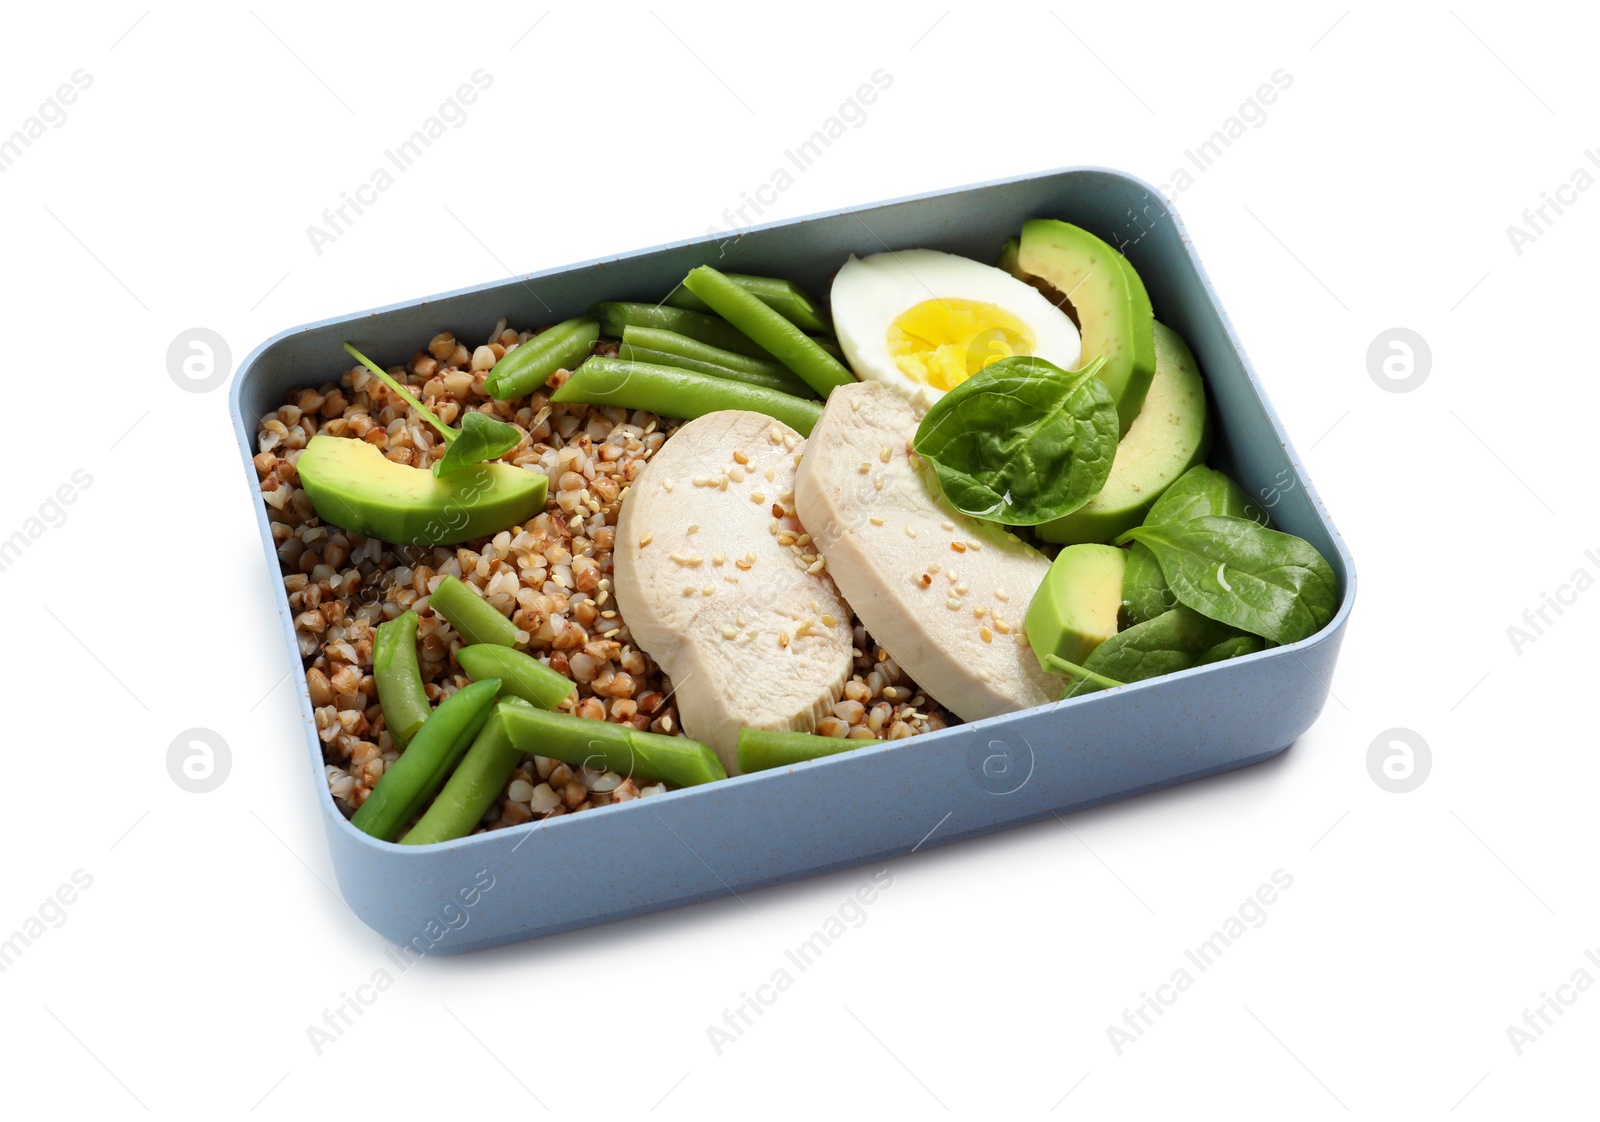 Photo of Container with natural protein food on white background